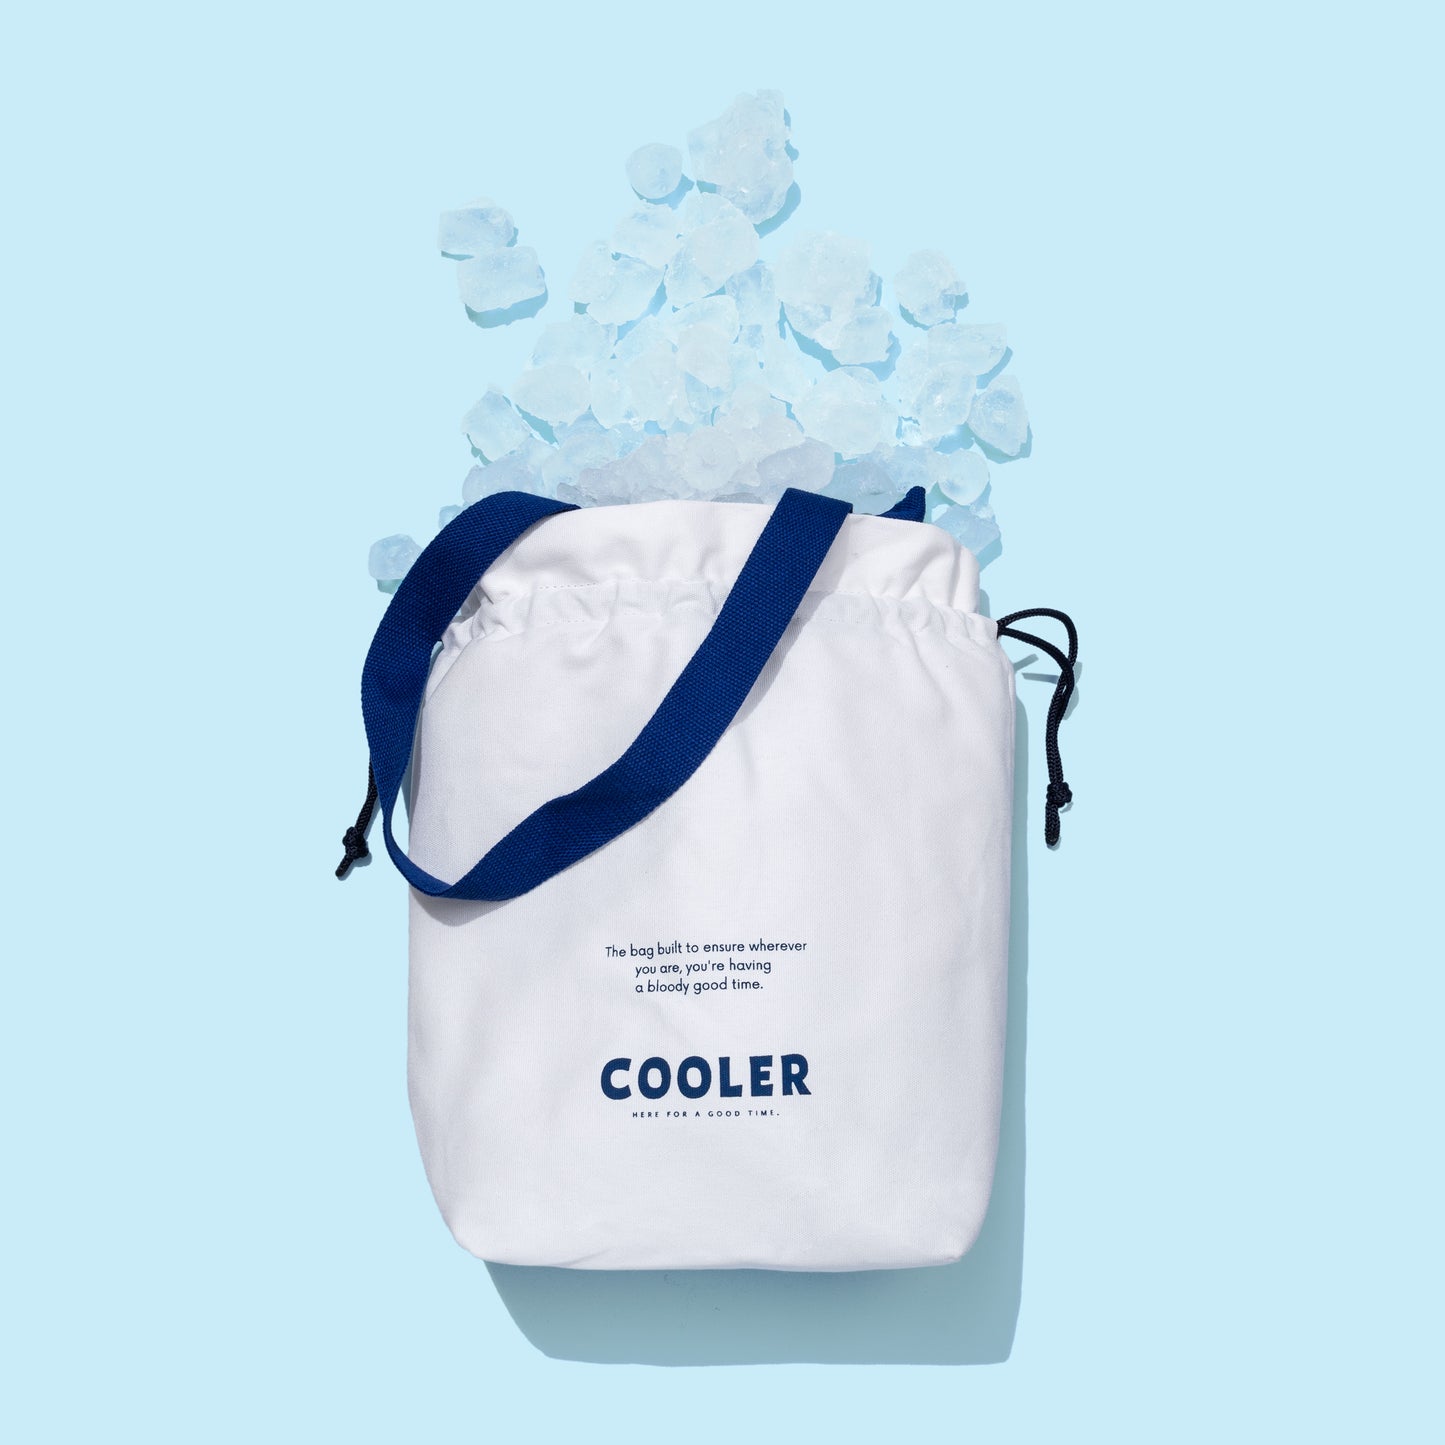 The OG Cooler - Coolers and Insulated Bags